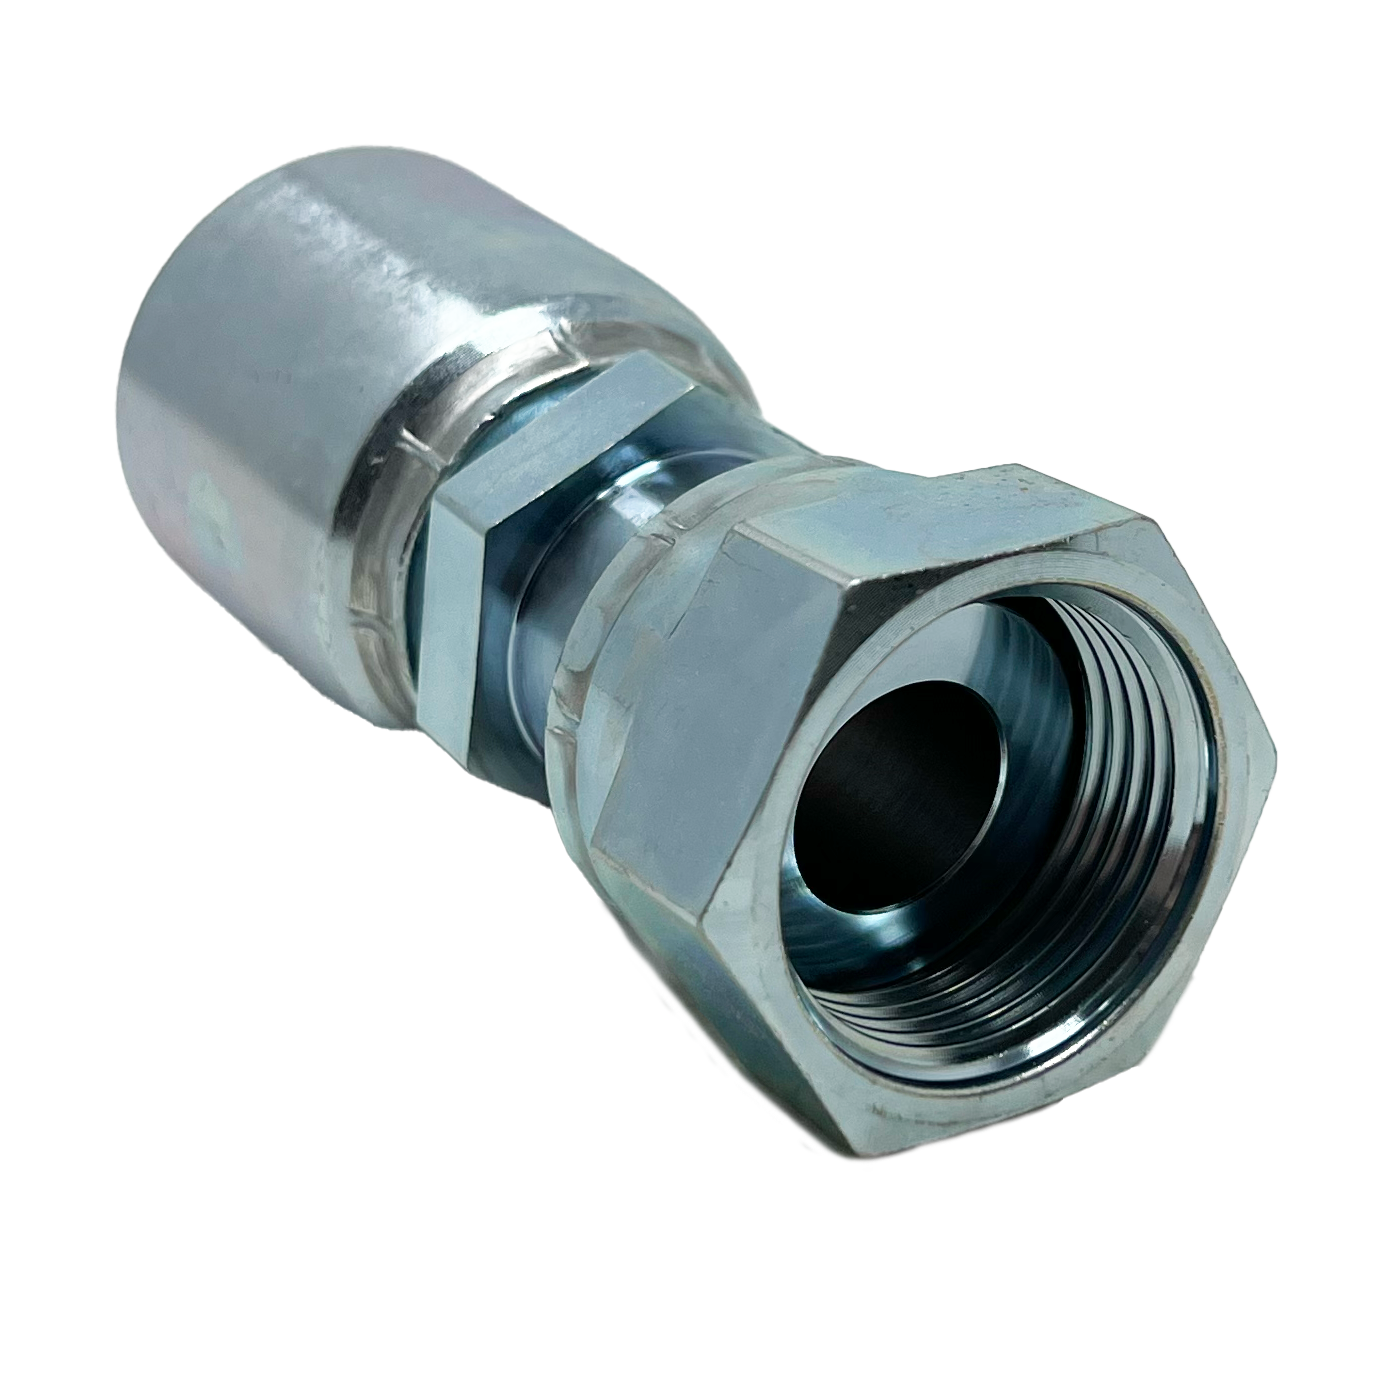 B2-OFFX-1216: Continental Hose Fitting, 0.75 (3/4") Hose ID x 1-7/16-12 Female ORFS, Straight Swivel Connection